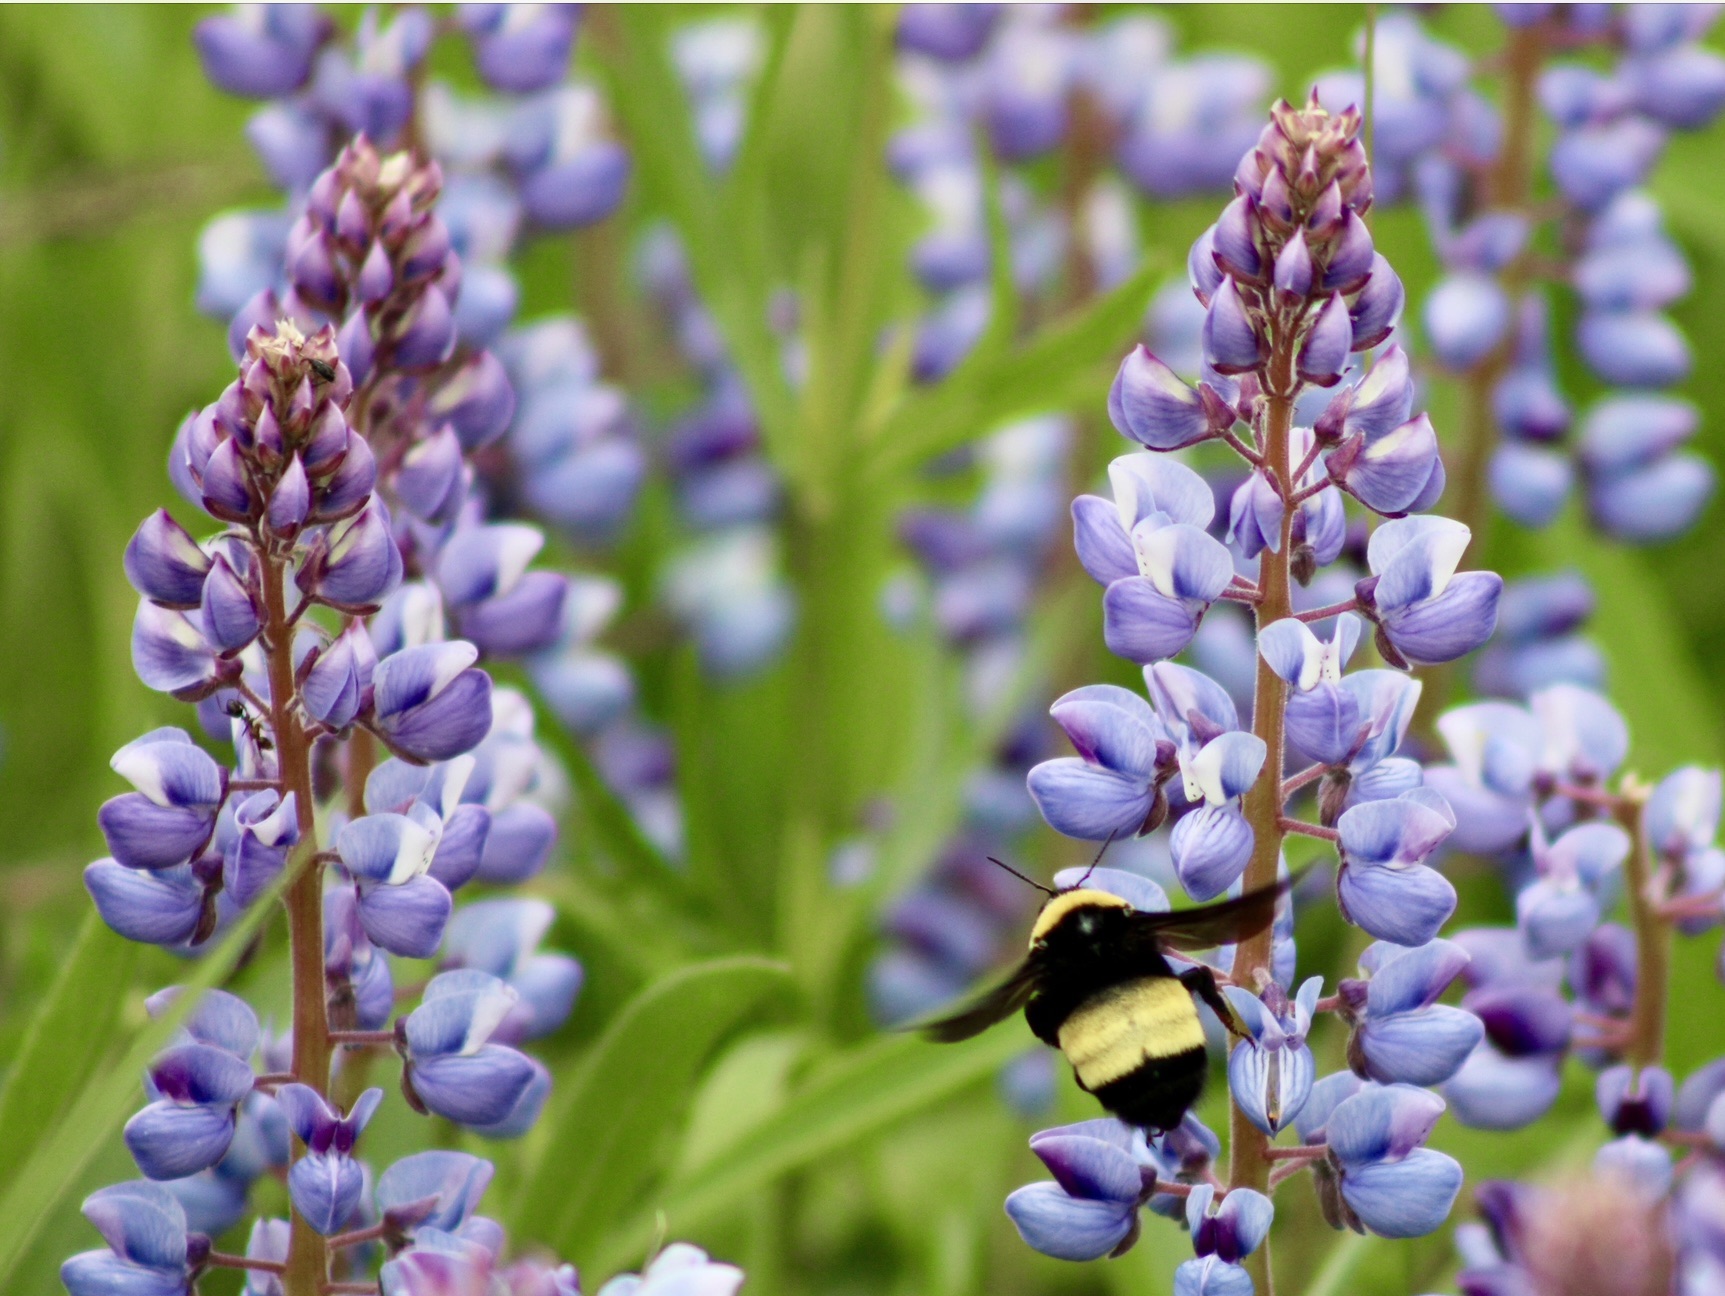 A bumblebee collecting nectar from vibrant purple lupine flowers in bloom.